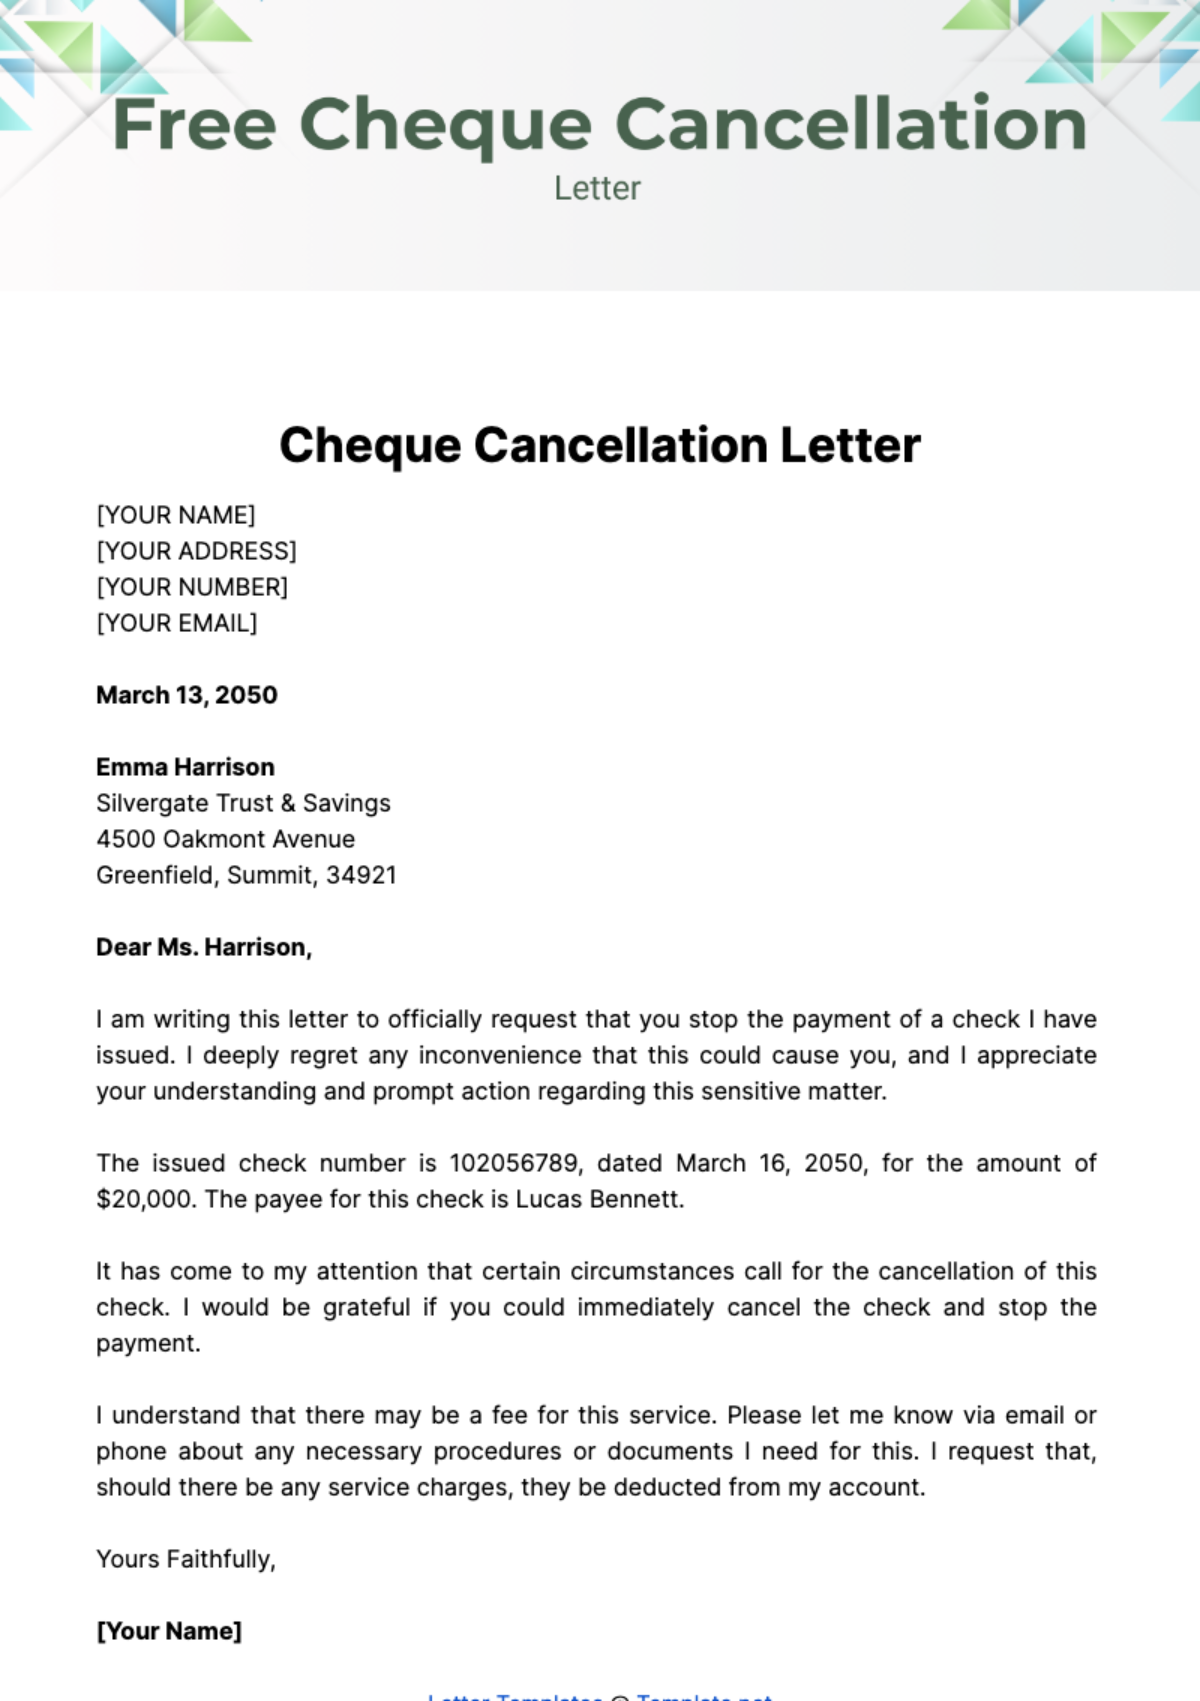 Free Cheque Cancellation Letter Template